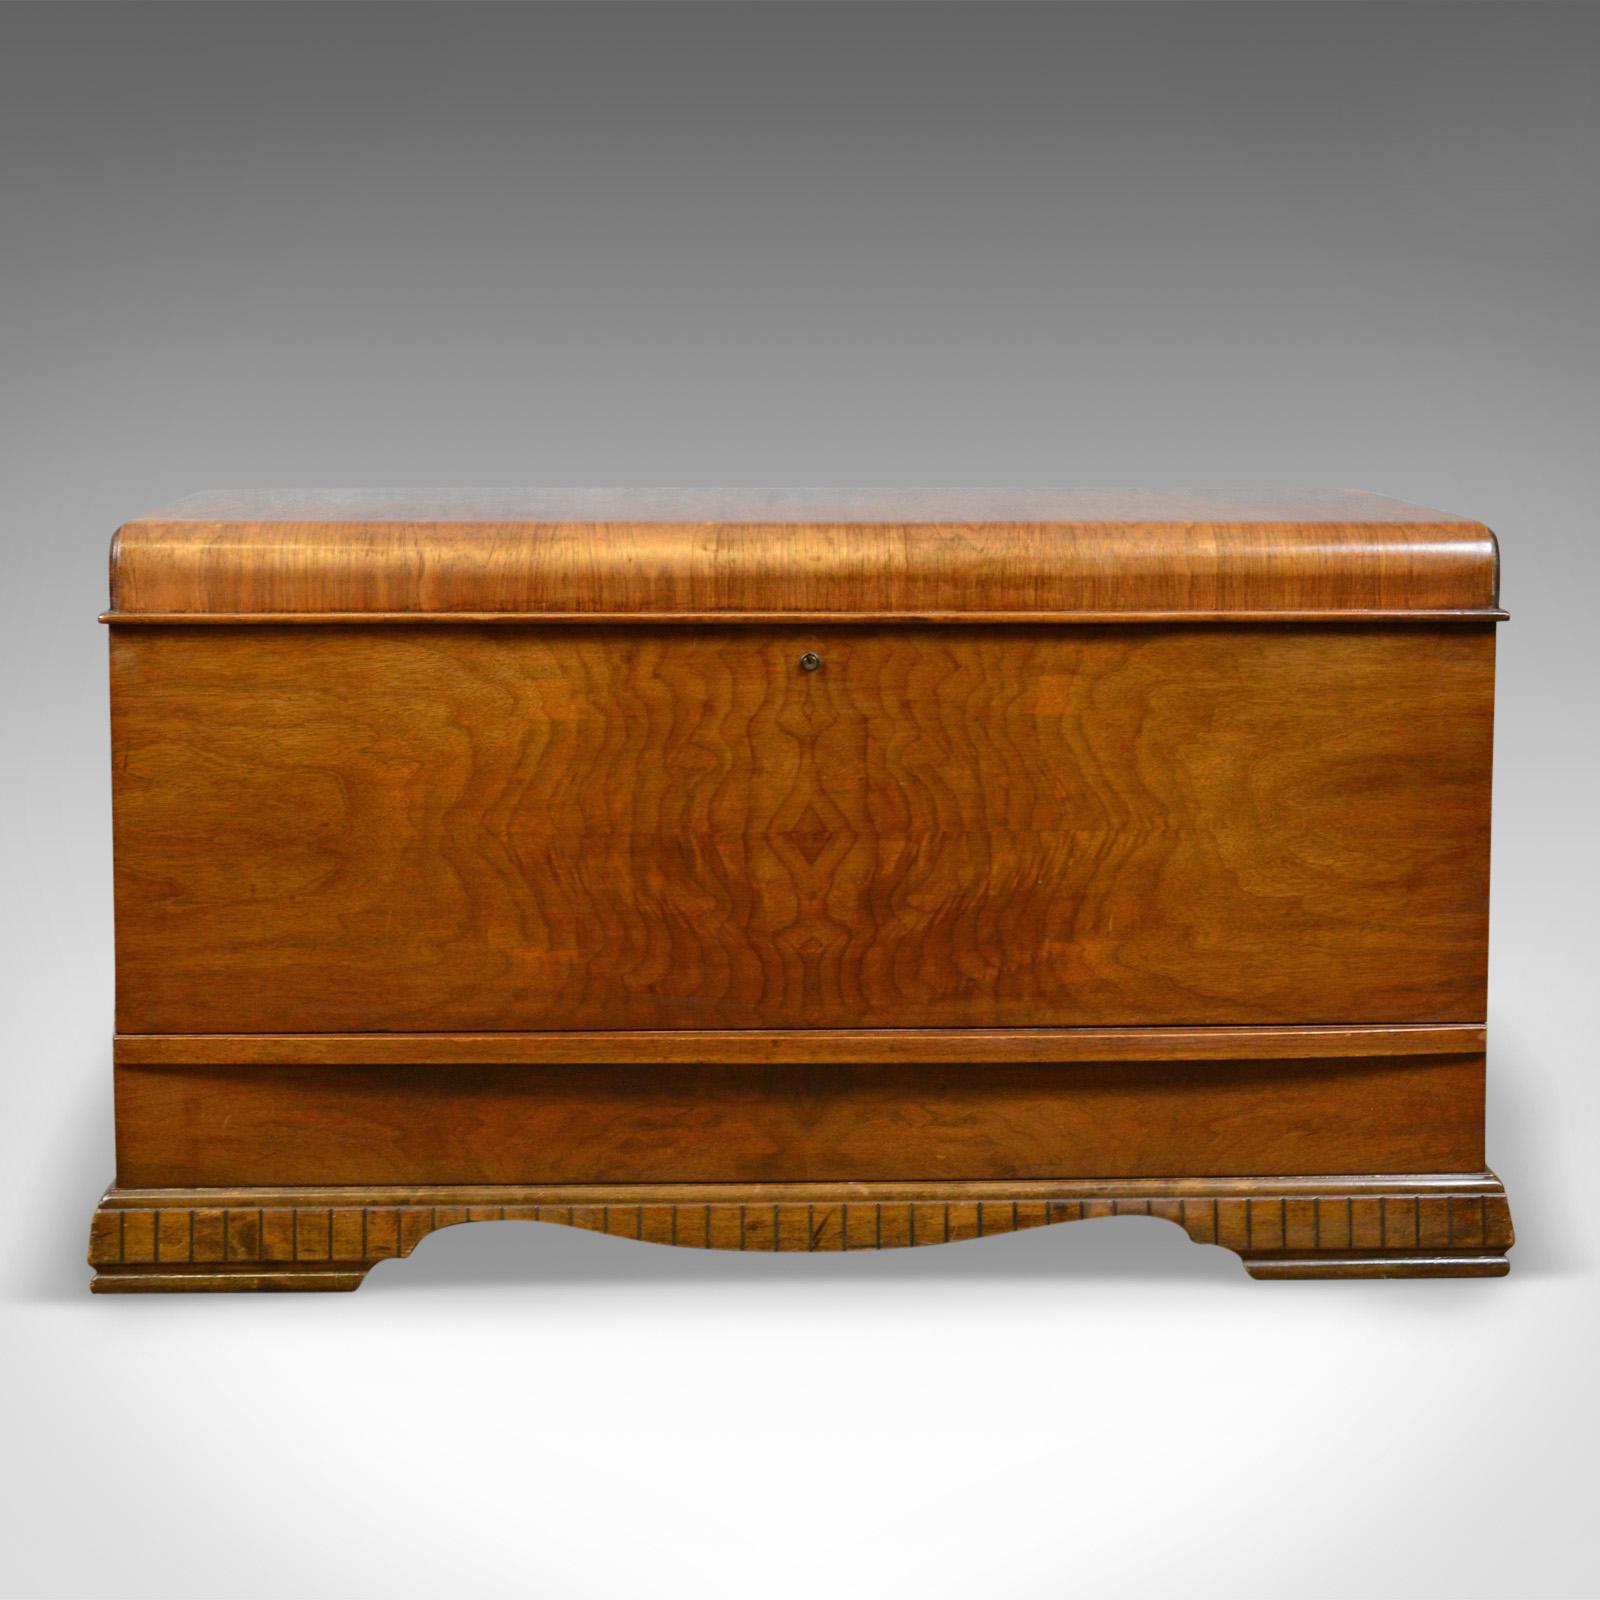 This is a vintage 1930s Canadian cedar storage trunk, a blanket chest dating to the Art Deco period of the early 20th century.

Displaying fine grain detail to the cedar
Good color in a wax polished finish
Art Deco influence with a desirable